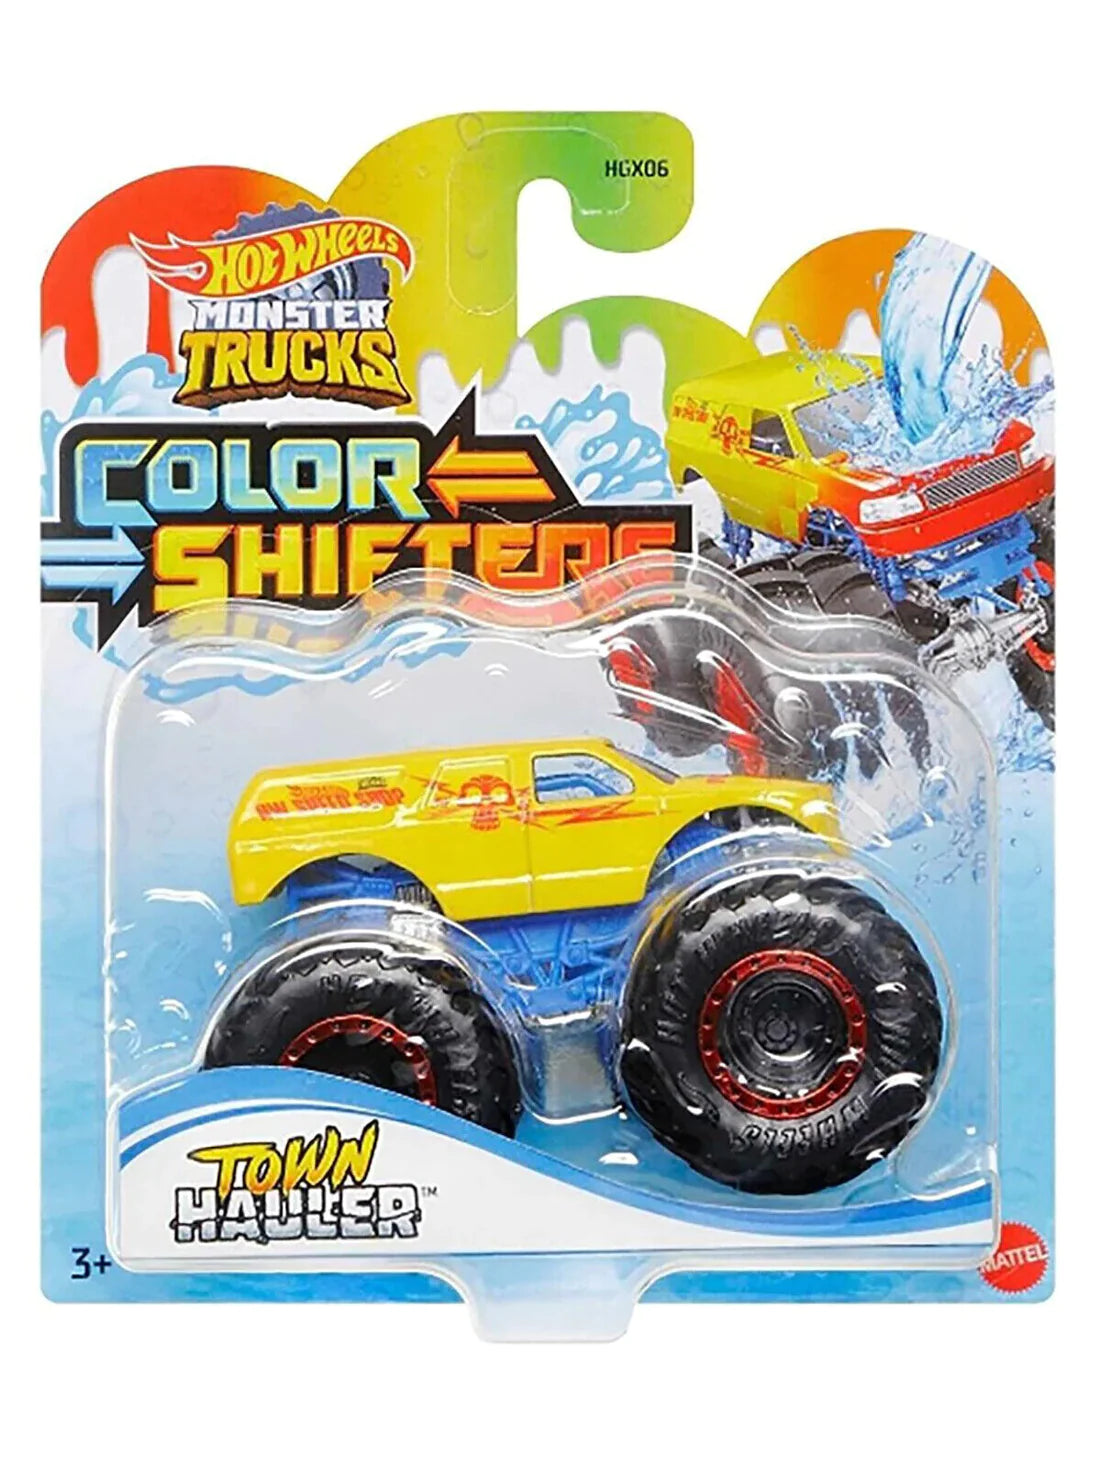 Hot Wheels Monster Trucks Color/Colour Shifters 1:64 New Sealed select the best - TOWN HAULER